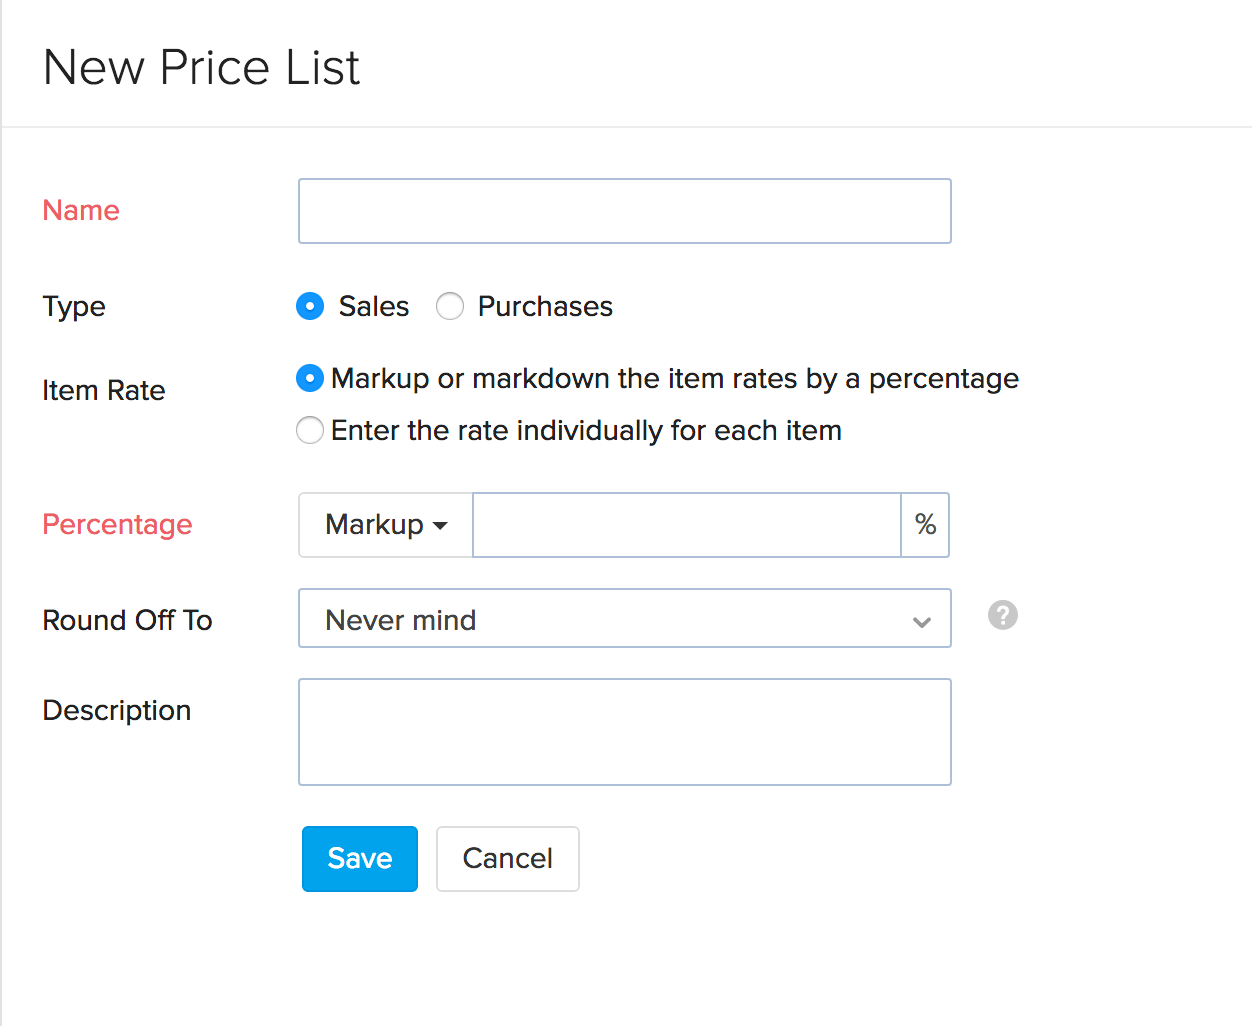 Image of the new price list page